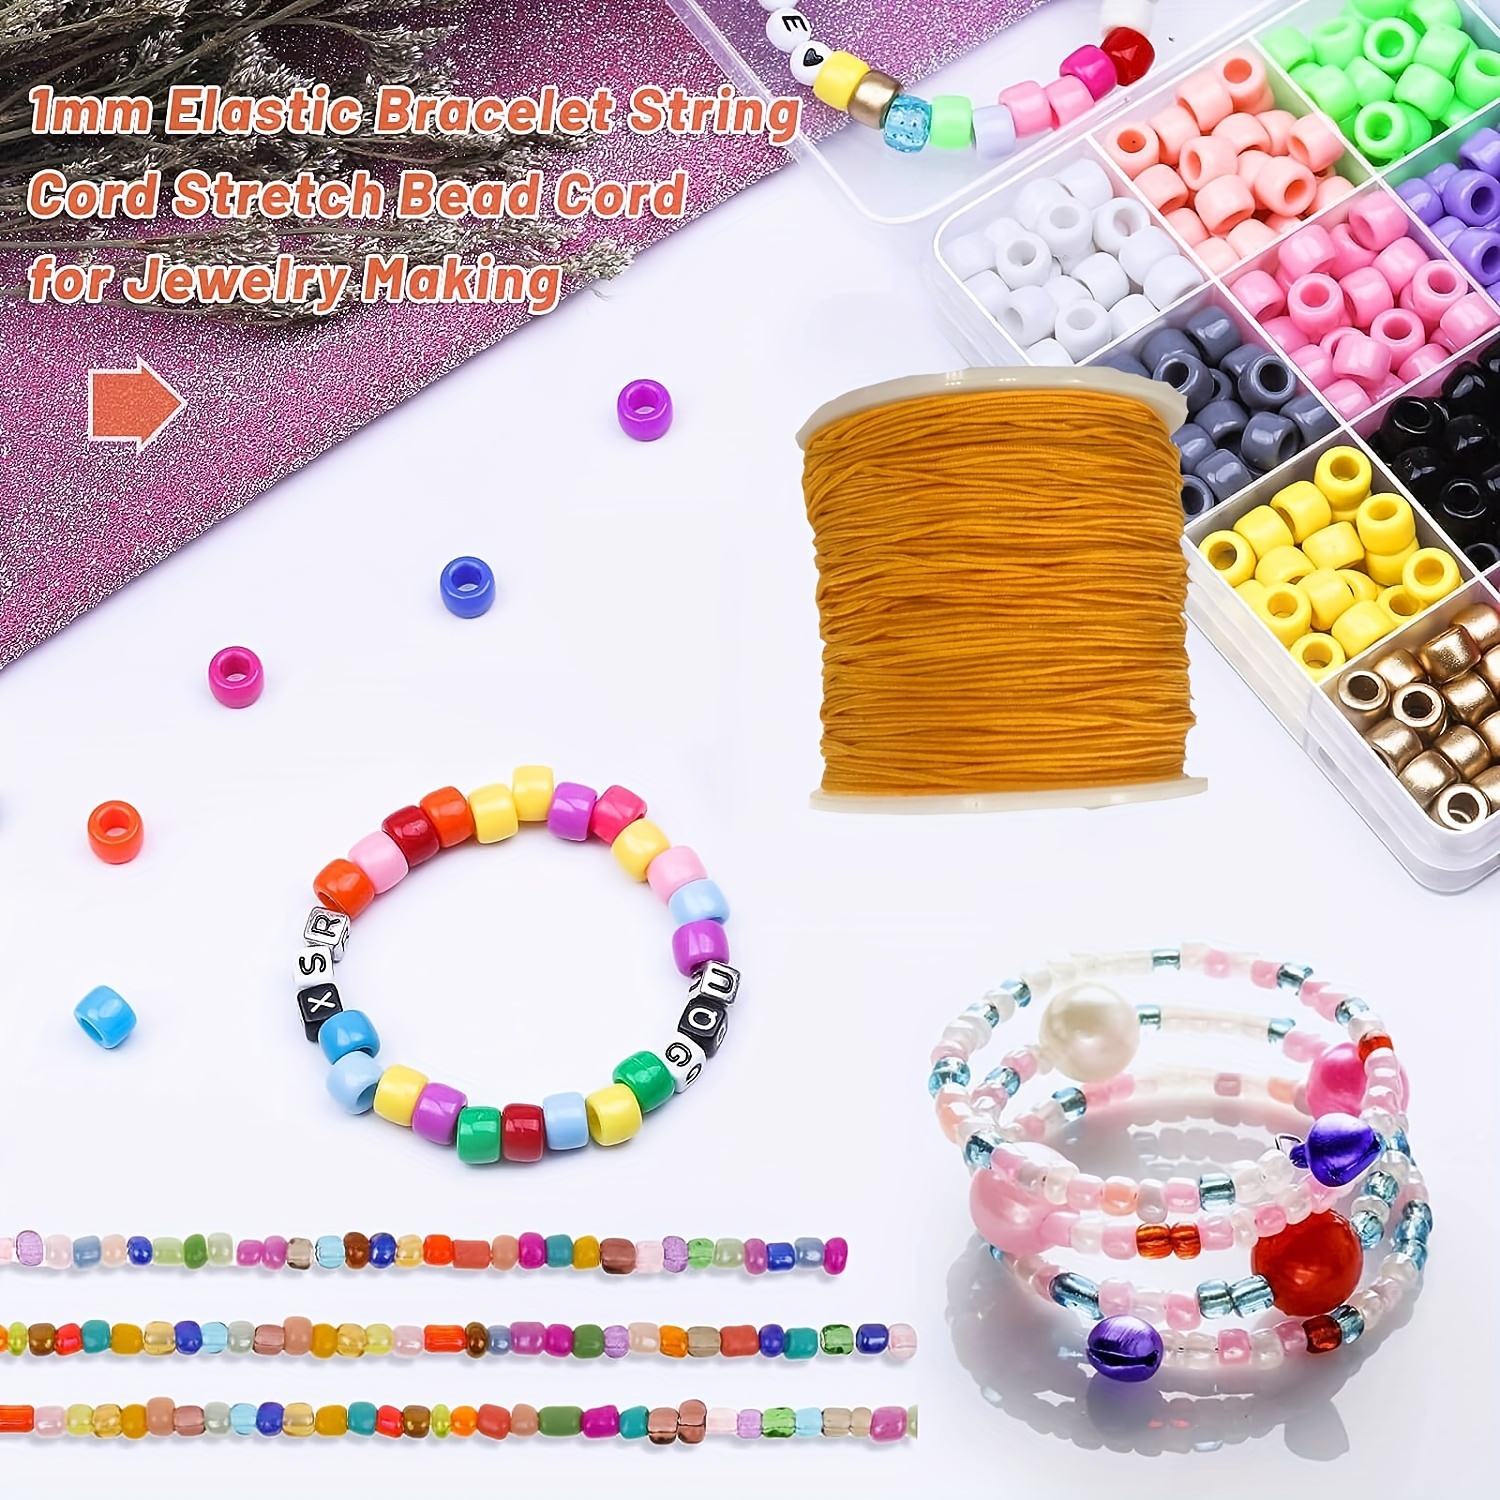 Bead Weaving Loom Kit 4 inches wide by up to 50 inches long by